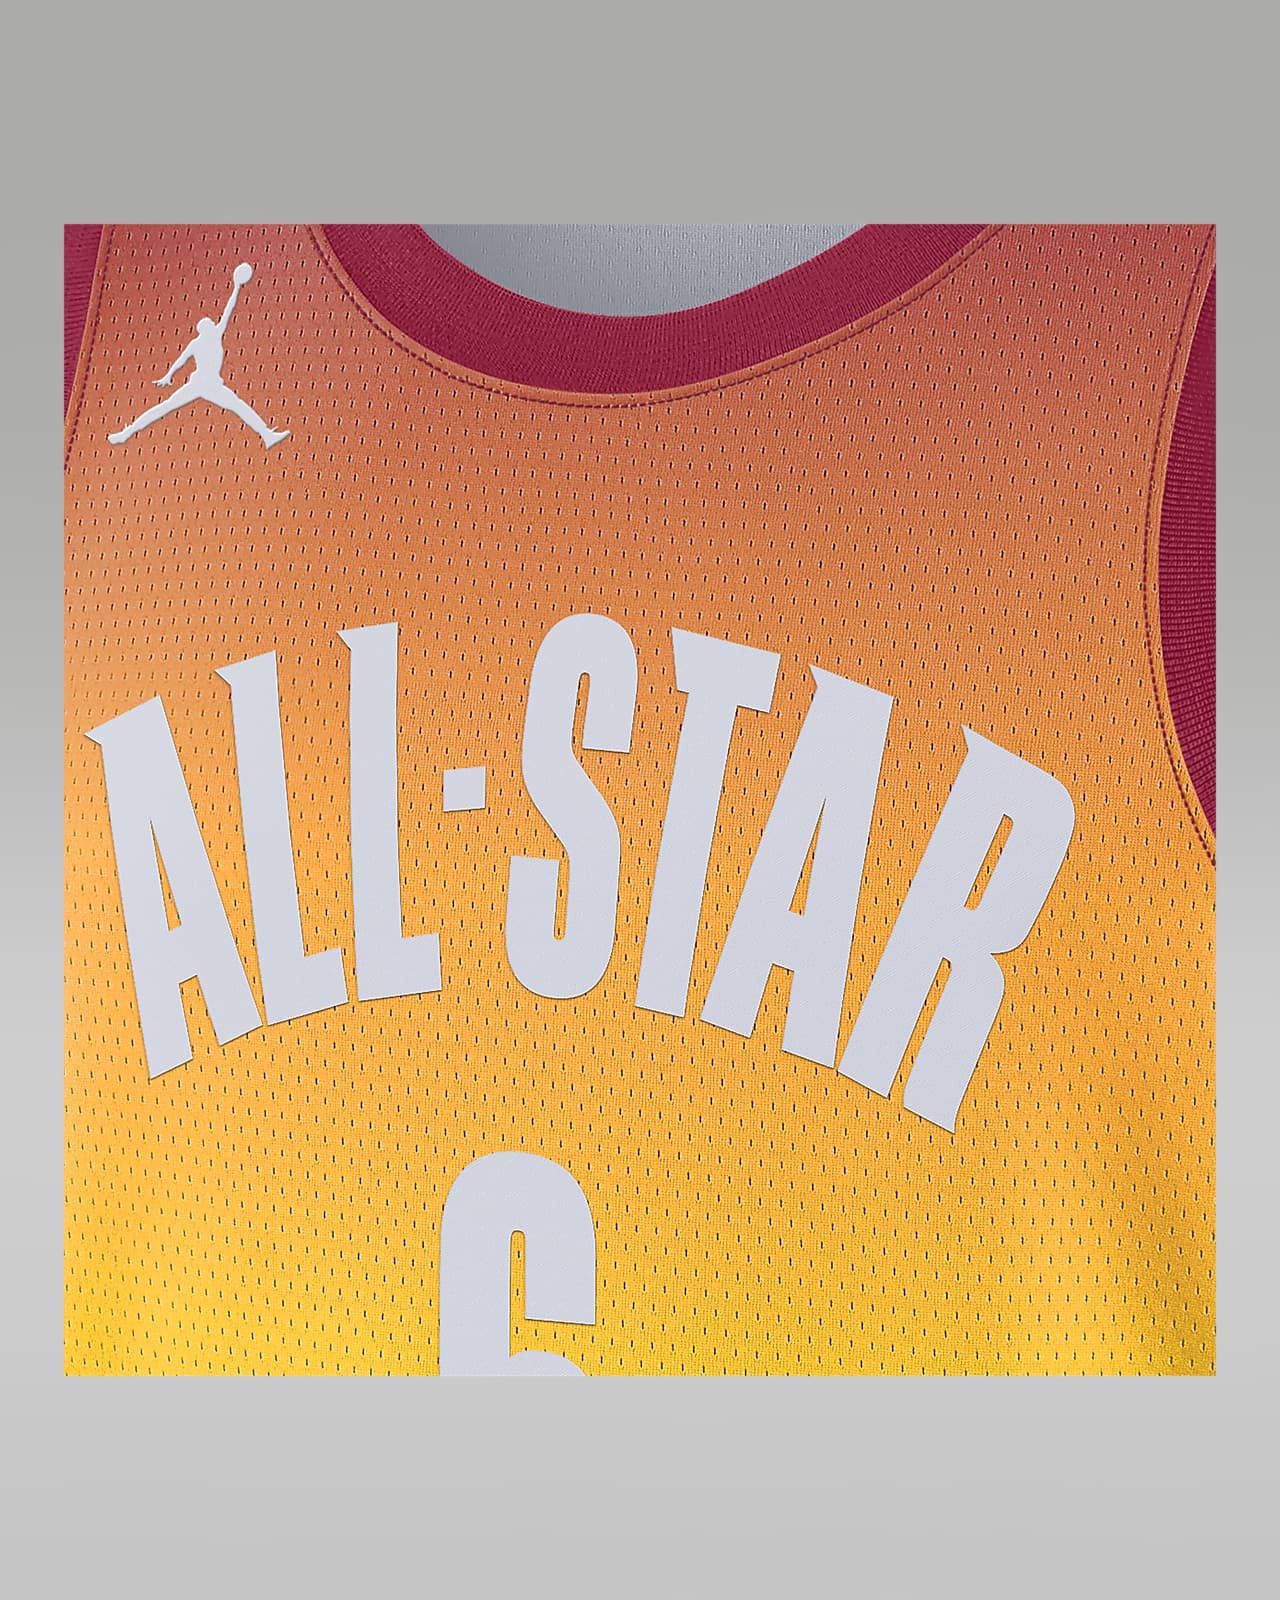 nba all star jerseys 2021 for sale